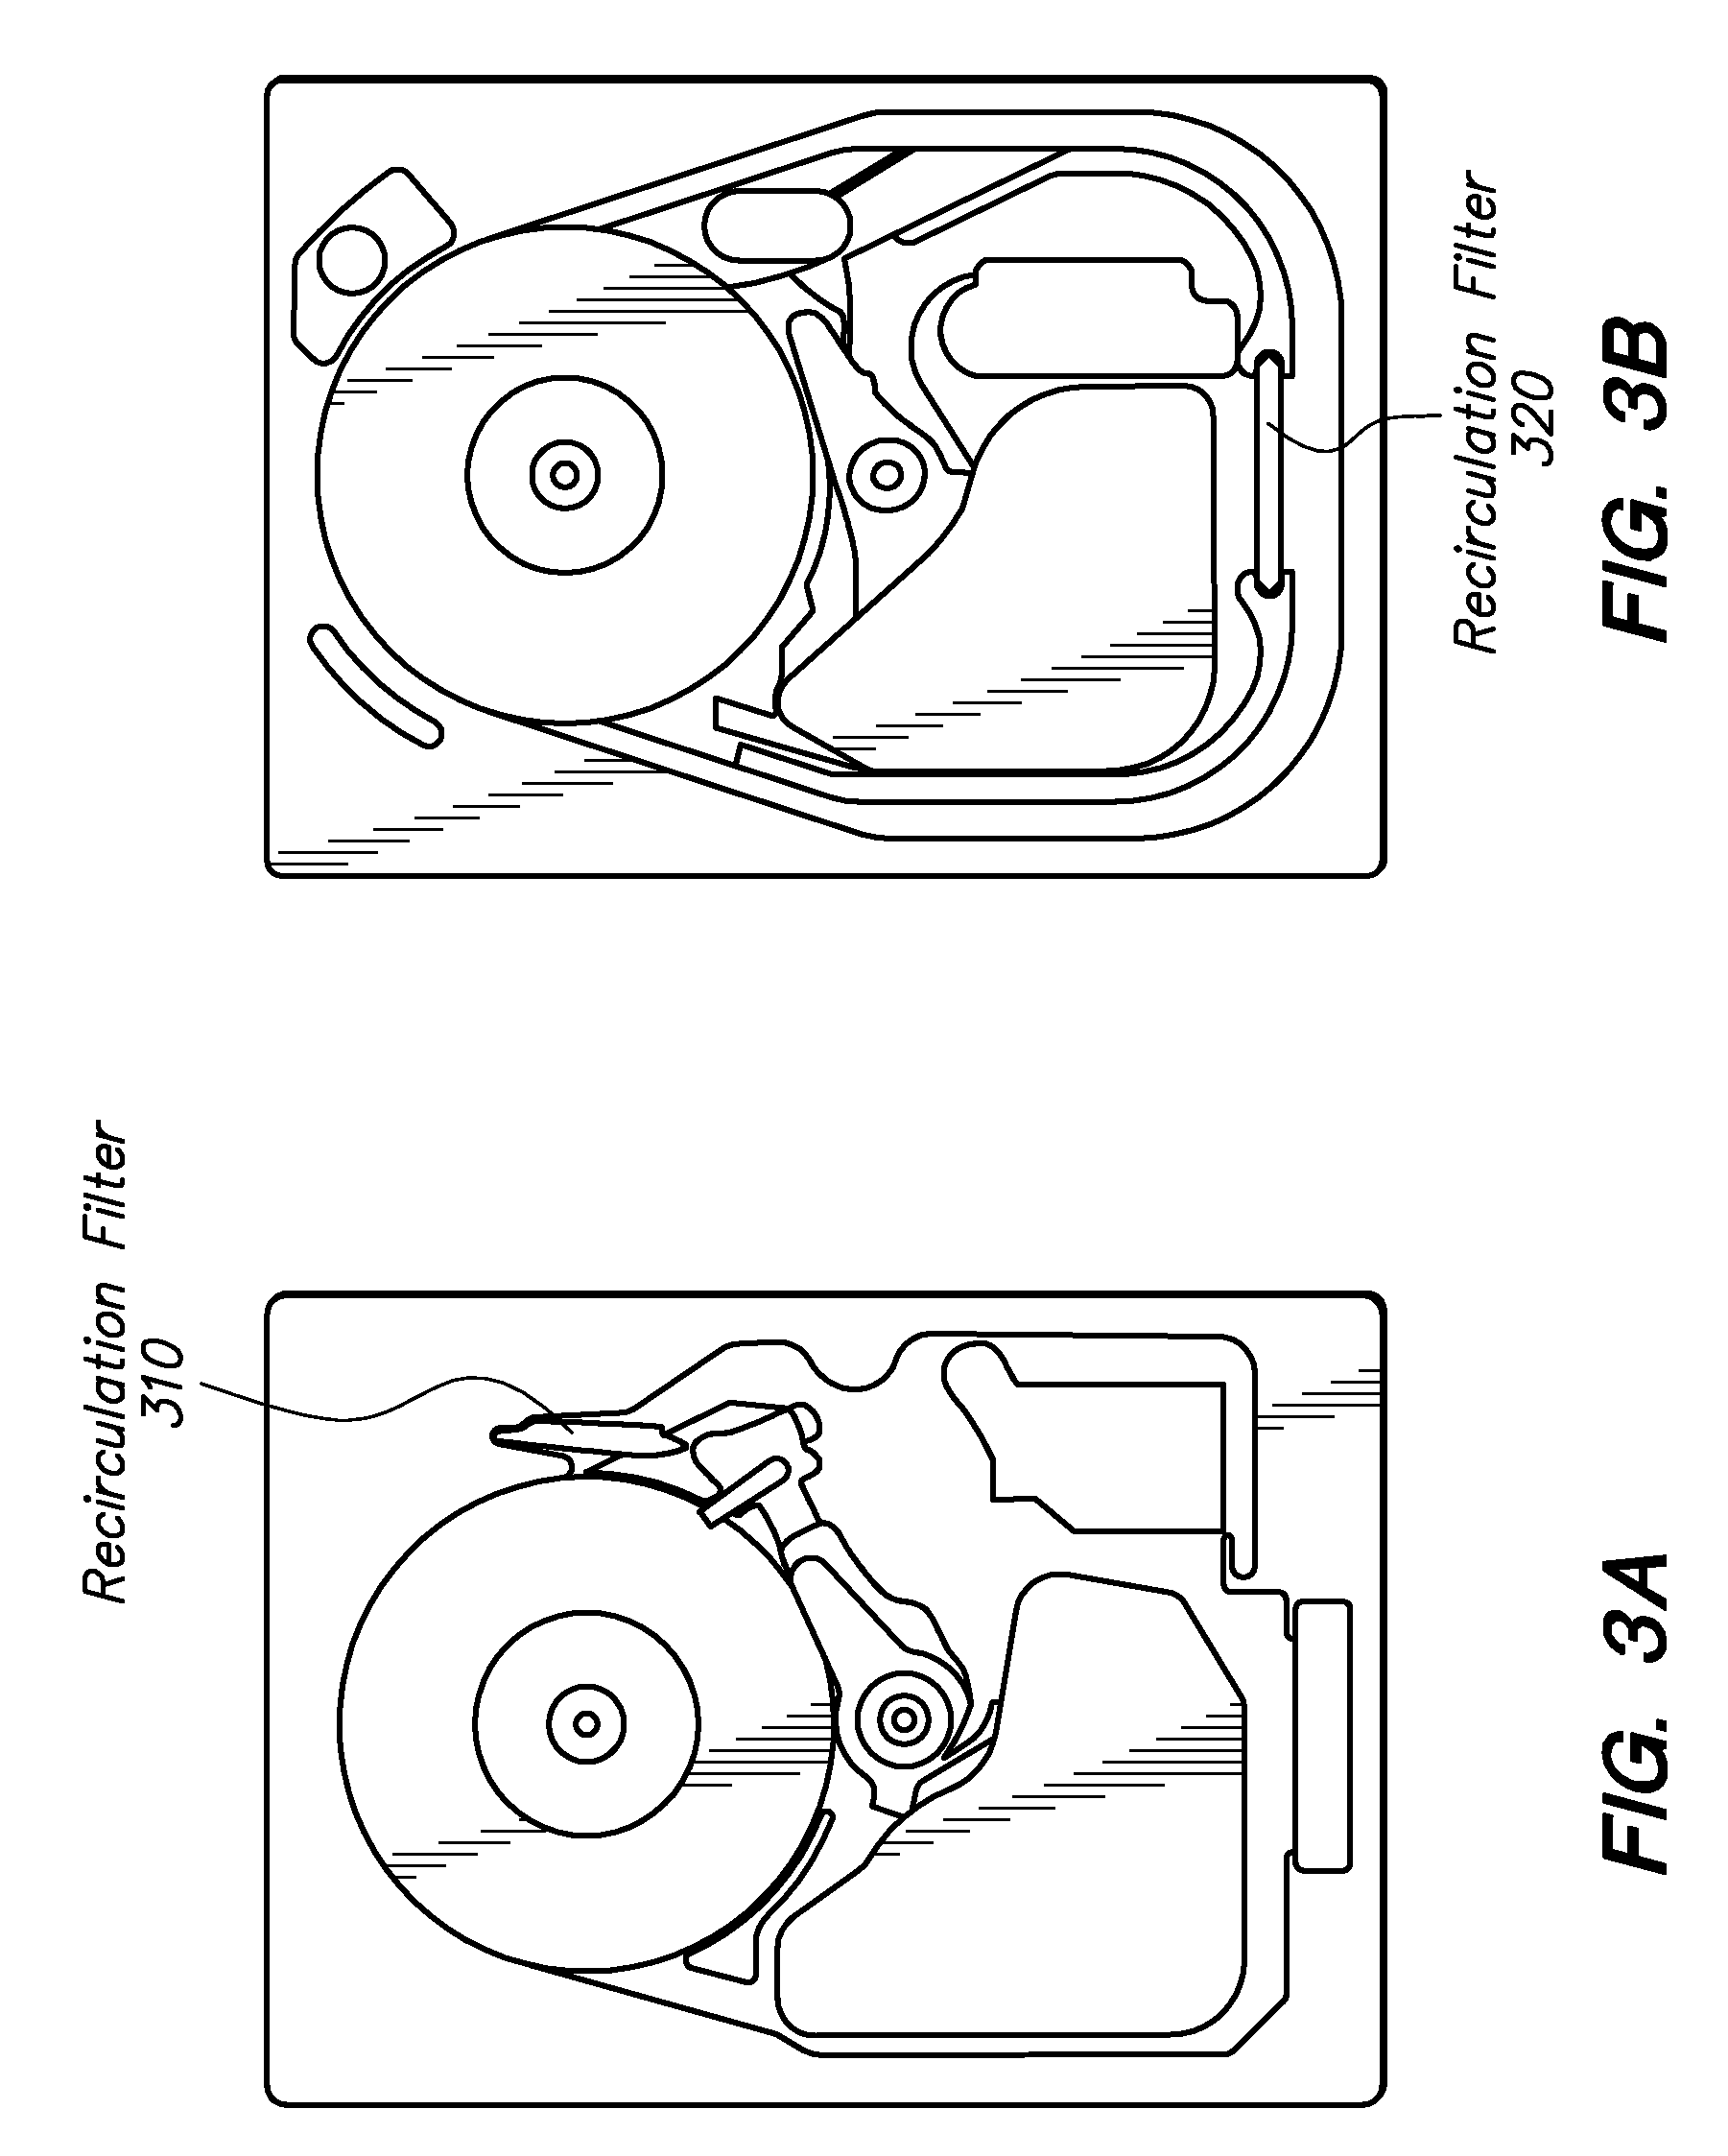 Airborne particle trap within an enclosure containing sensitive equipment